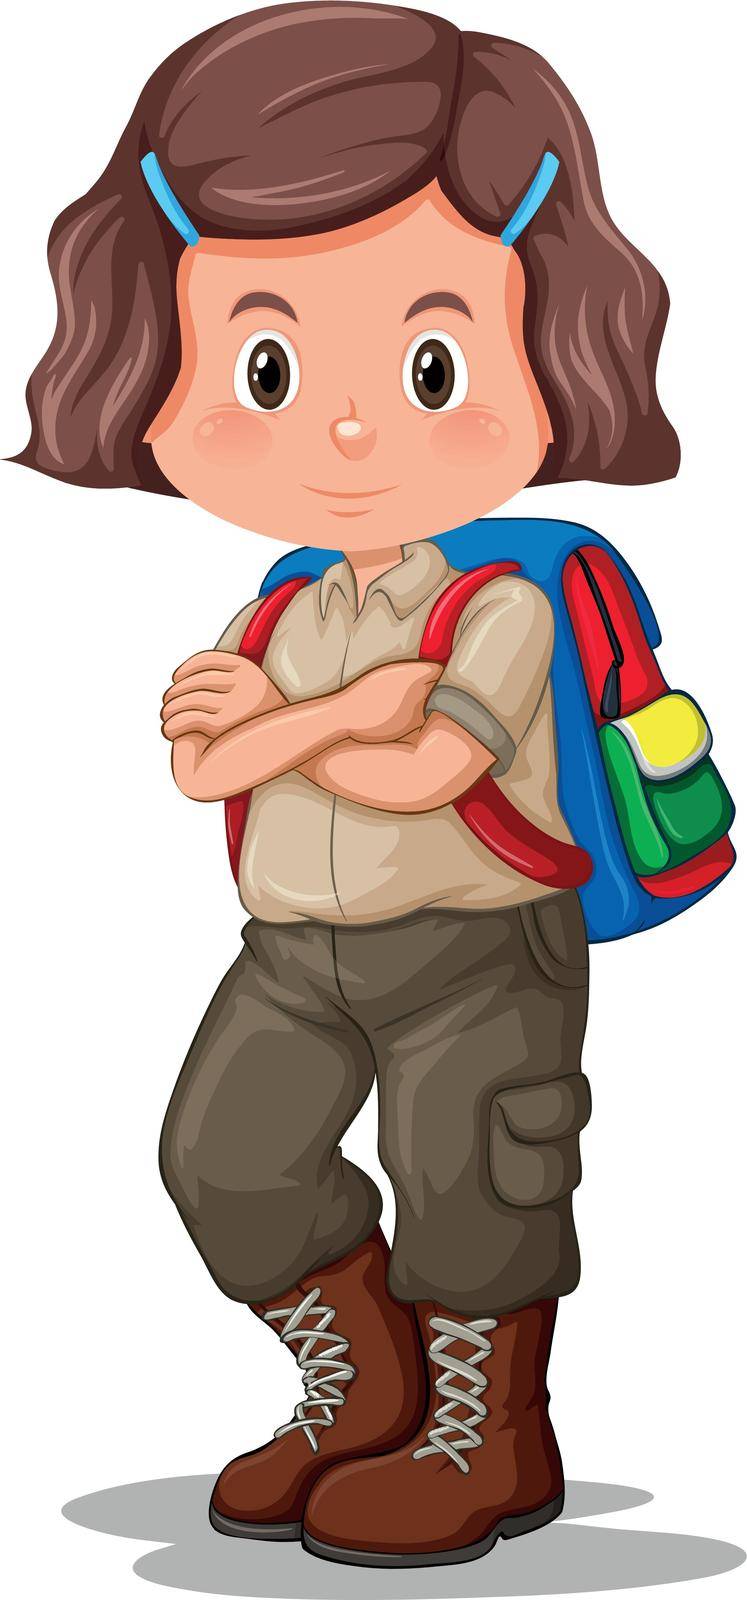 A girl with scout uniform illustration